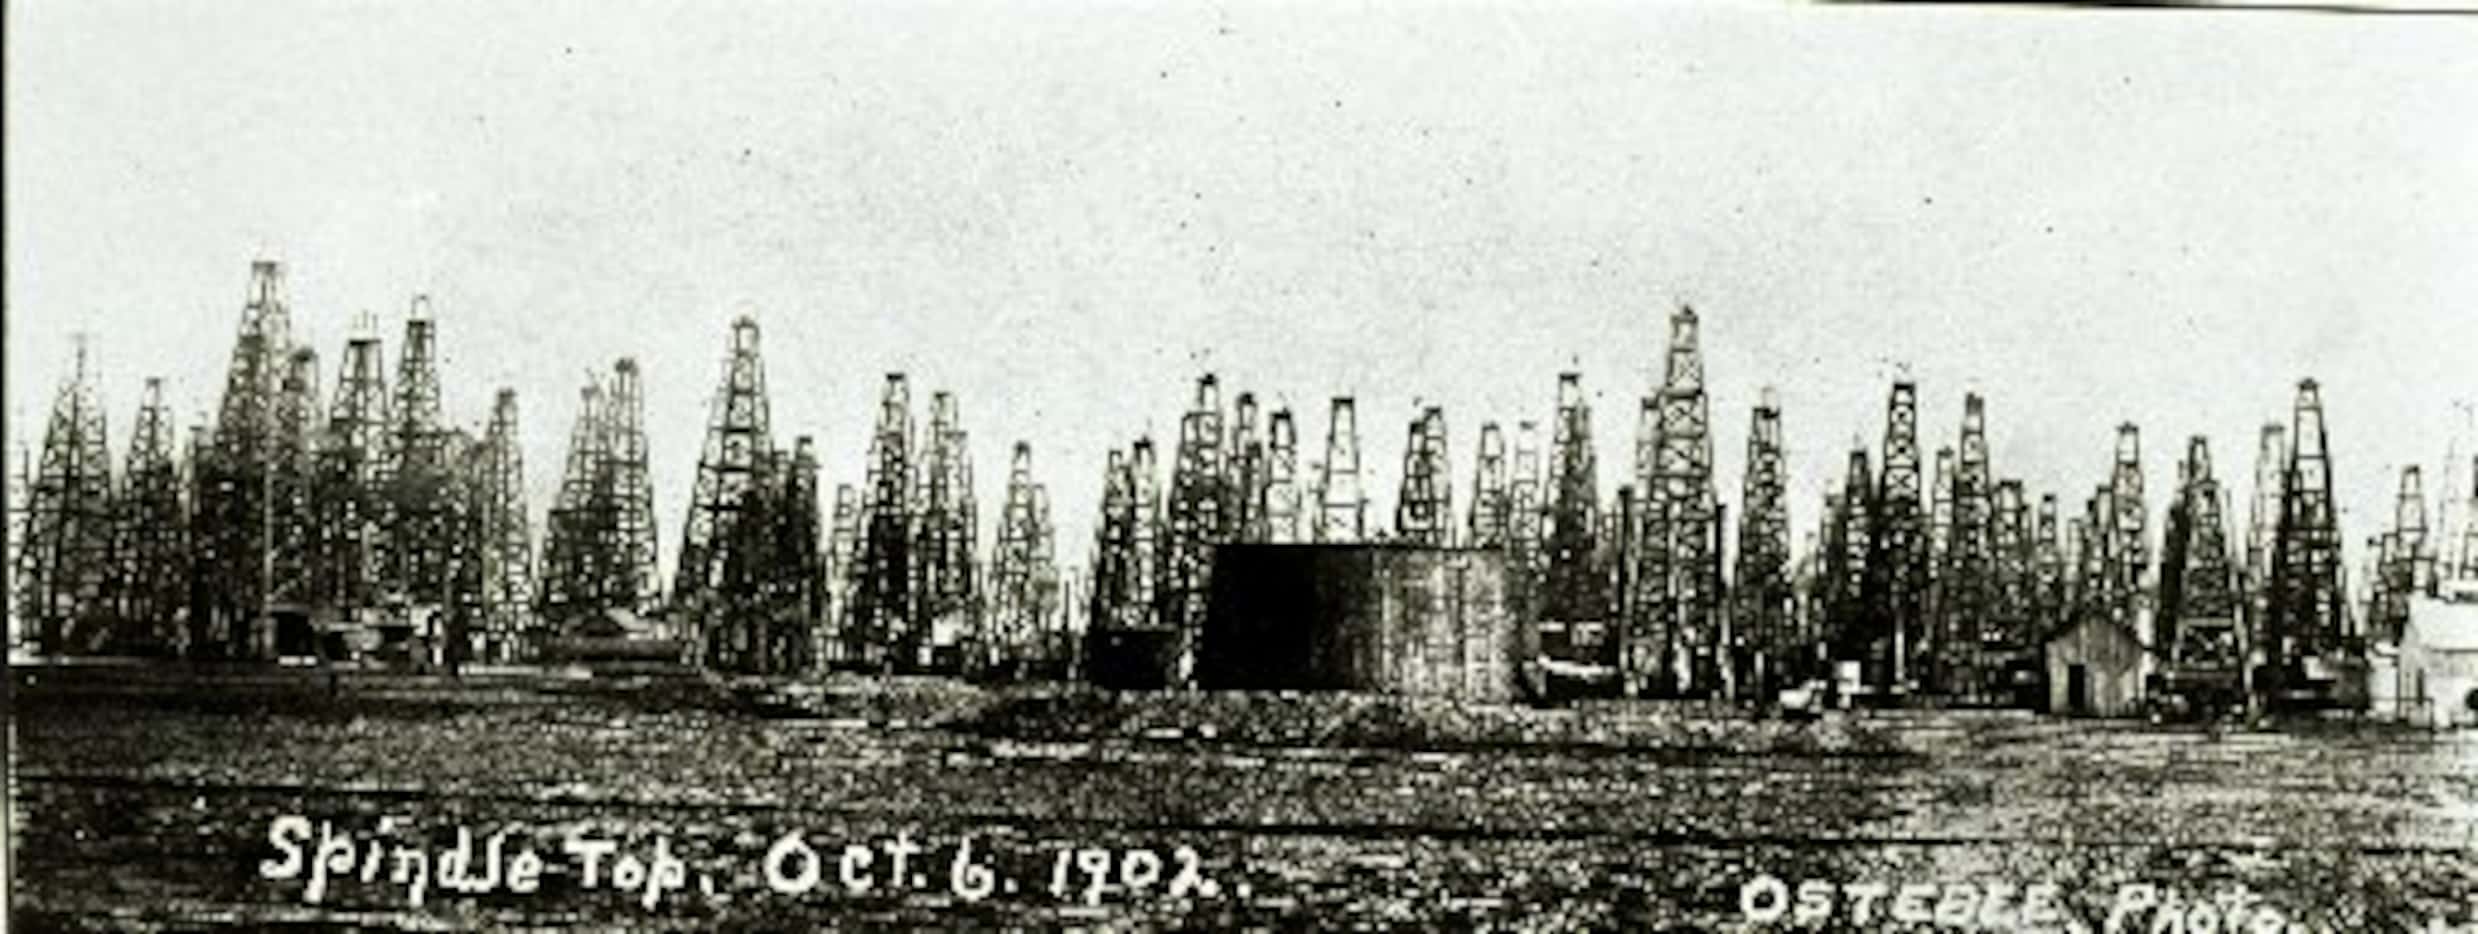 Beaumont Spindletop photographs 1901-1920.